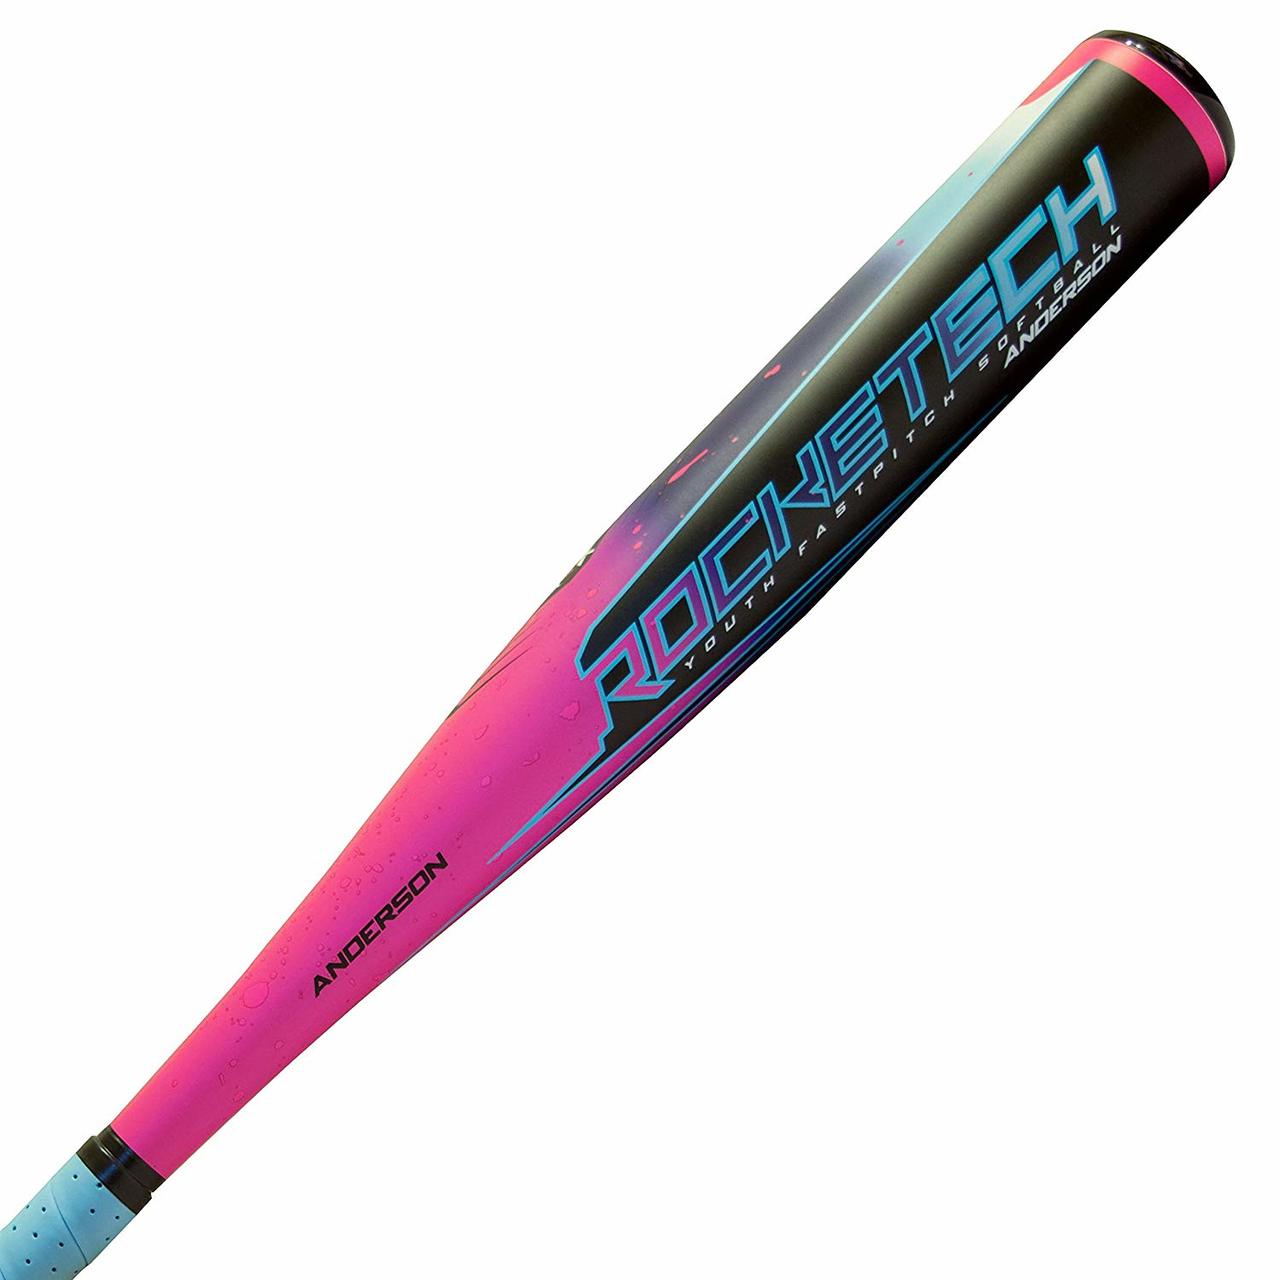 anderson-rocketech-12-youth-fastpitch-softball-bat-30-inch-18-oz 017036-3018 Anderson 874147008515 <p>Ideal for girls ages 7-10 2 ¼” Barrel / -12 Drop